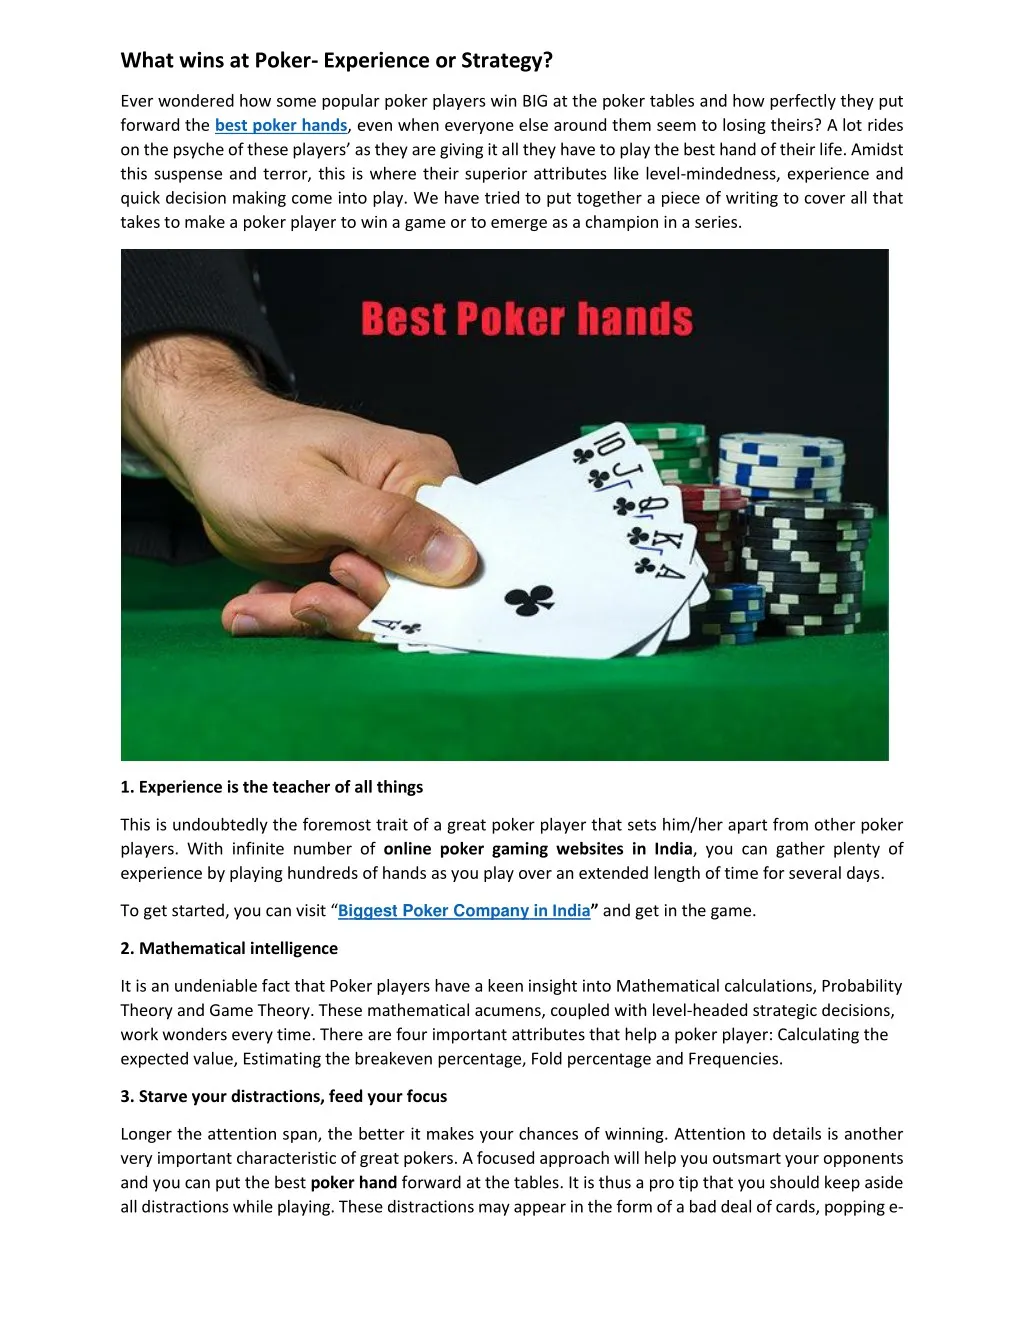 what wins at poker experience or strategy